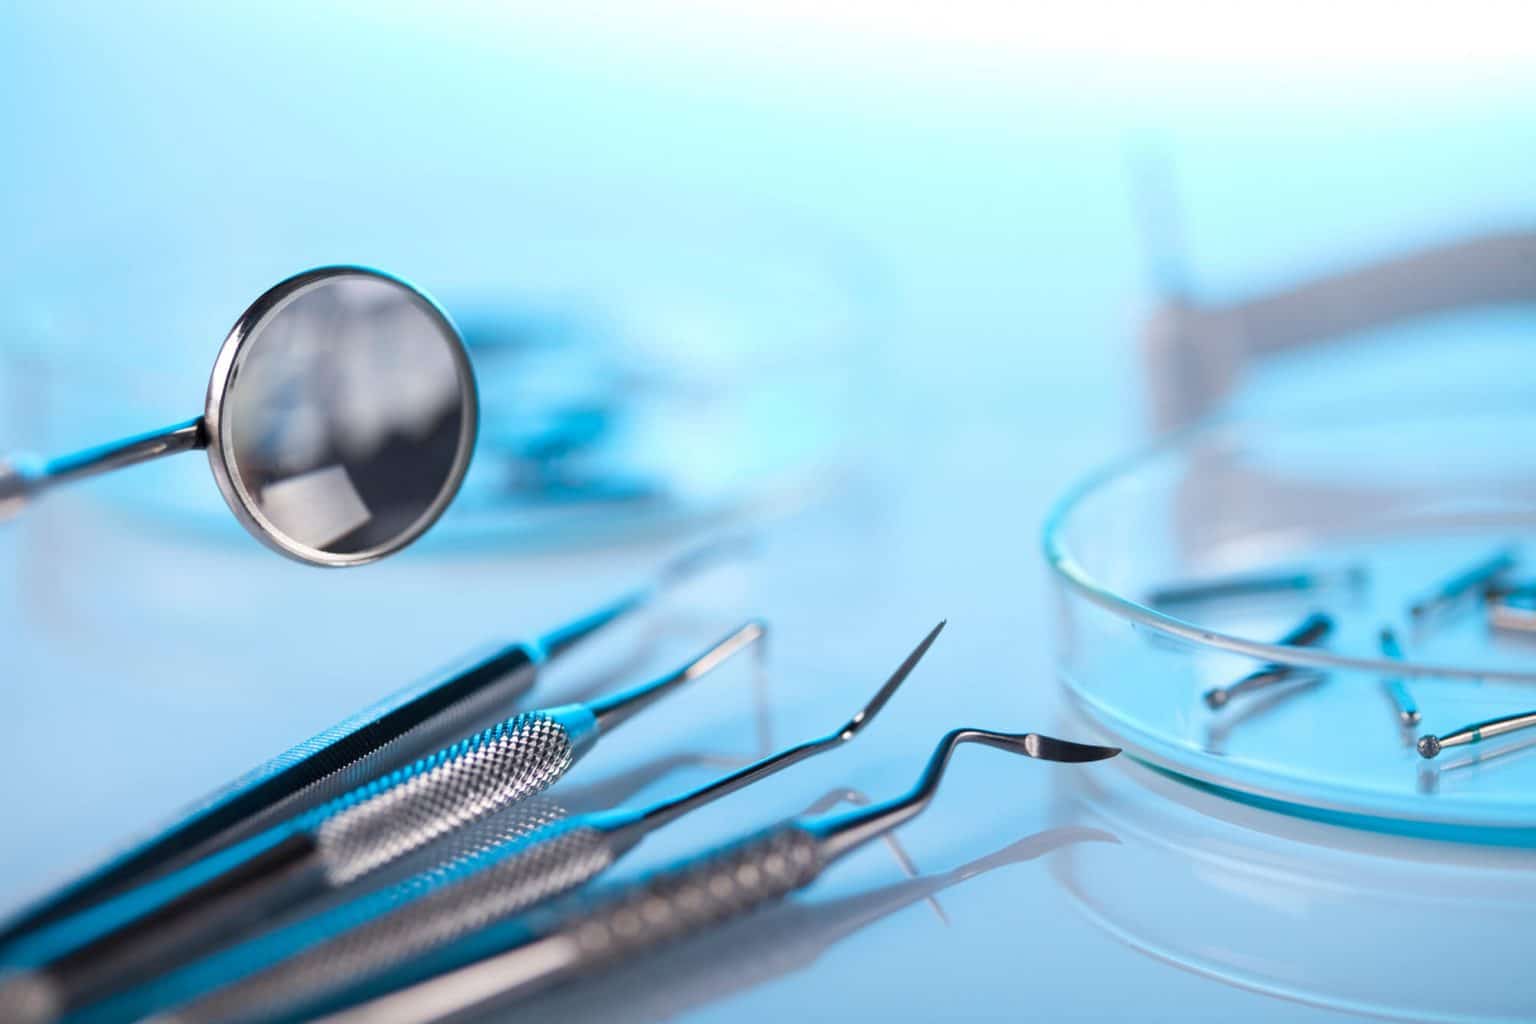 who offers the best oak park dentistry?